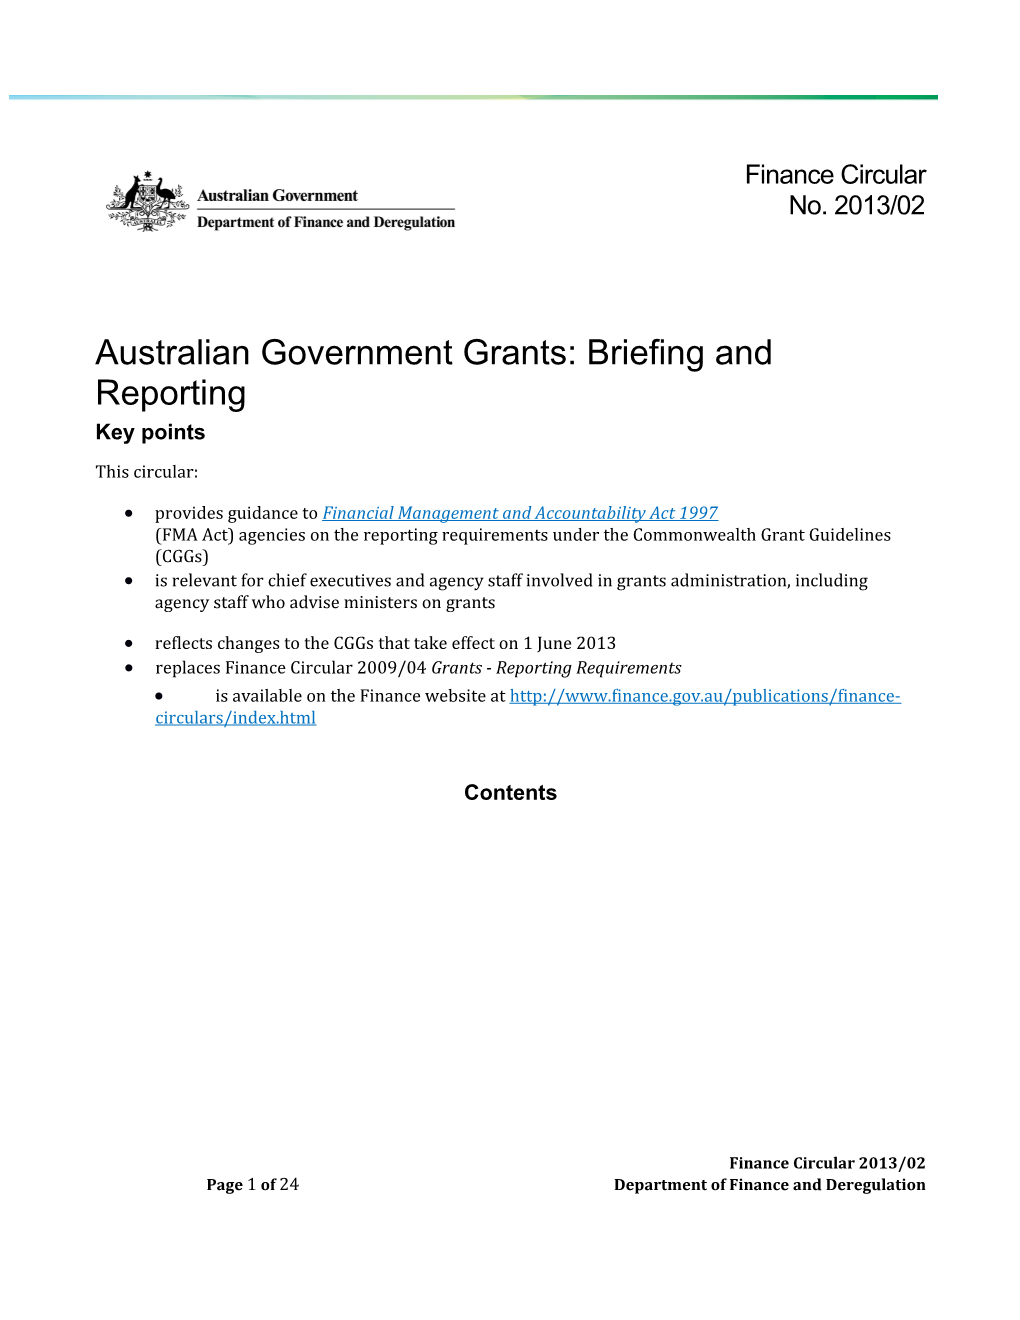 Finance Circular2013/02Australian Government Grants: Briefing and Reporting